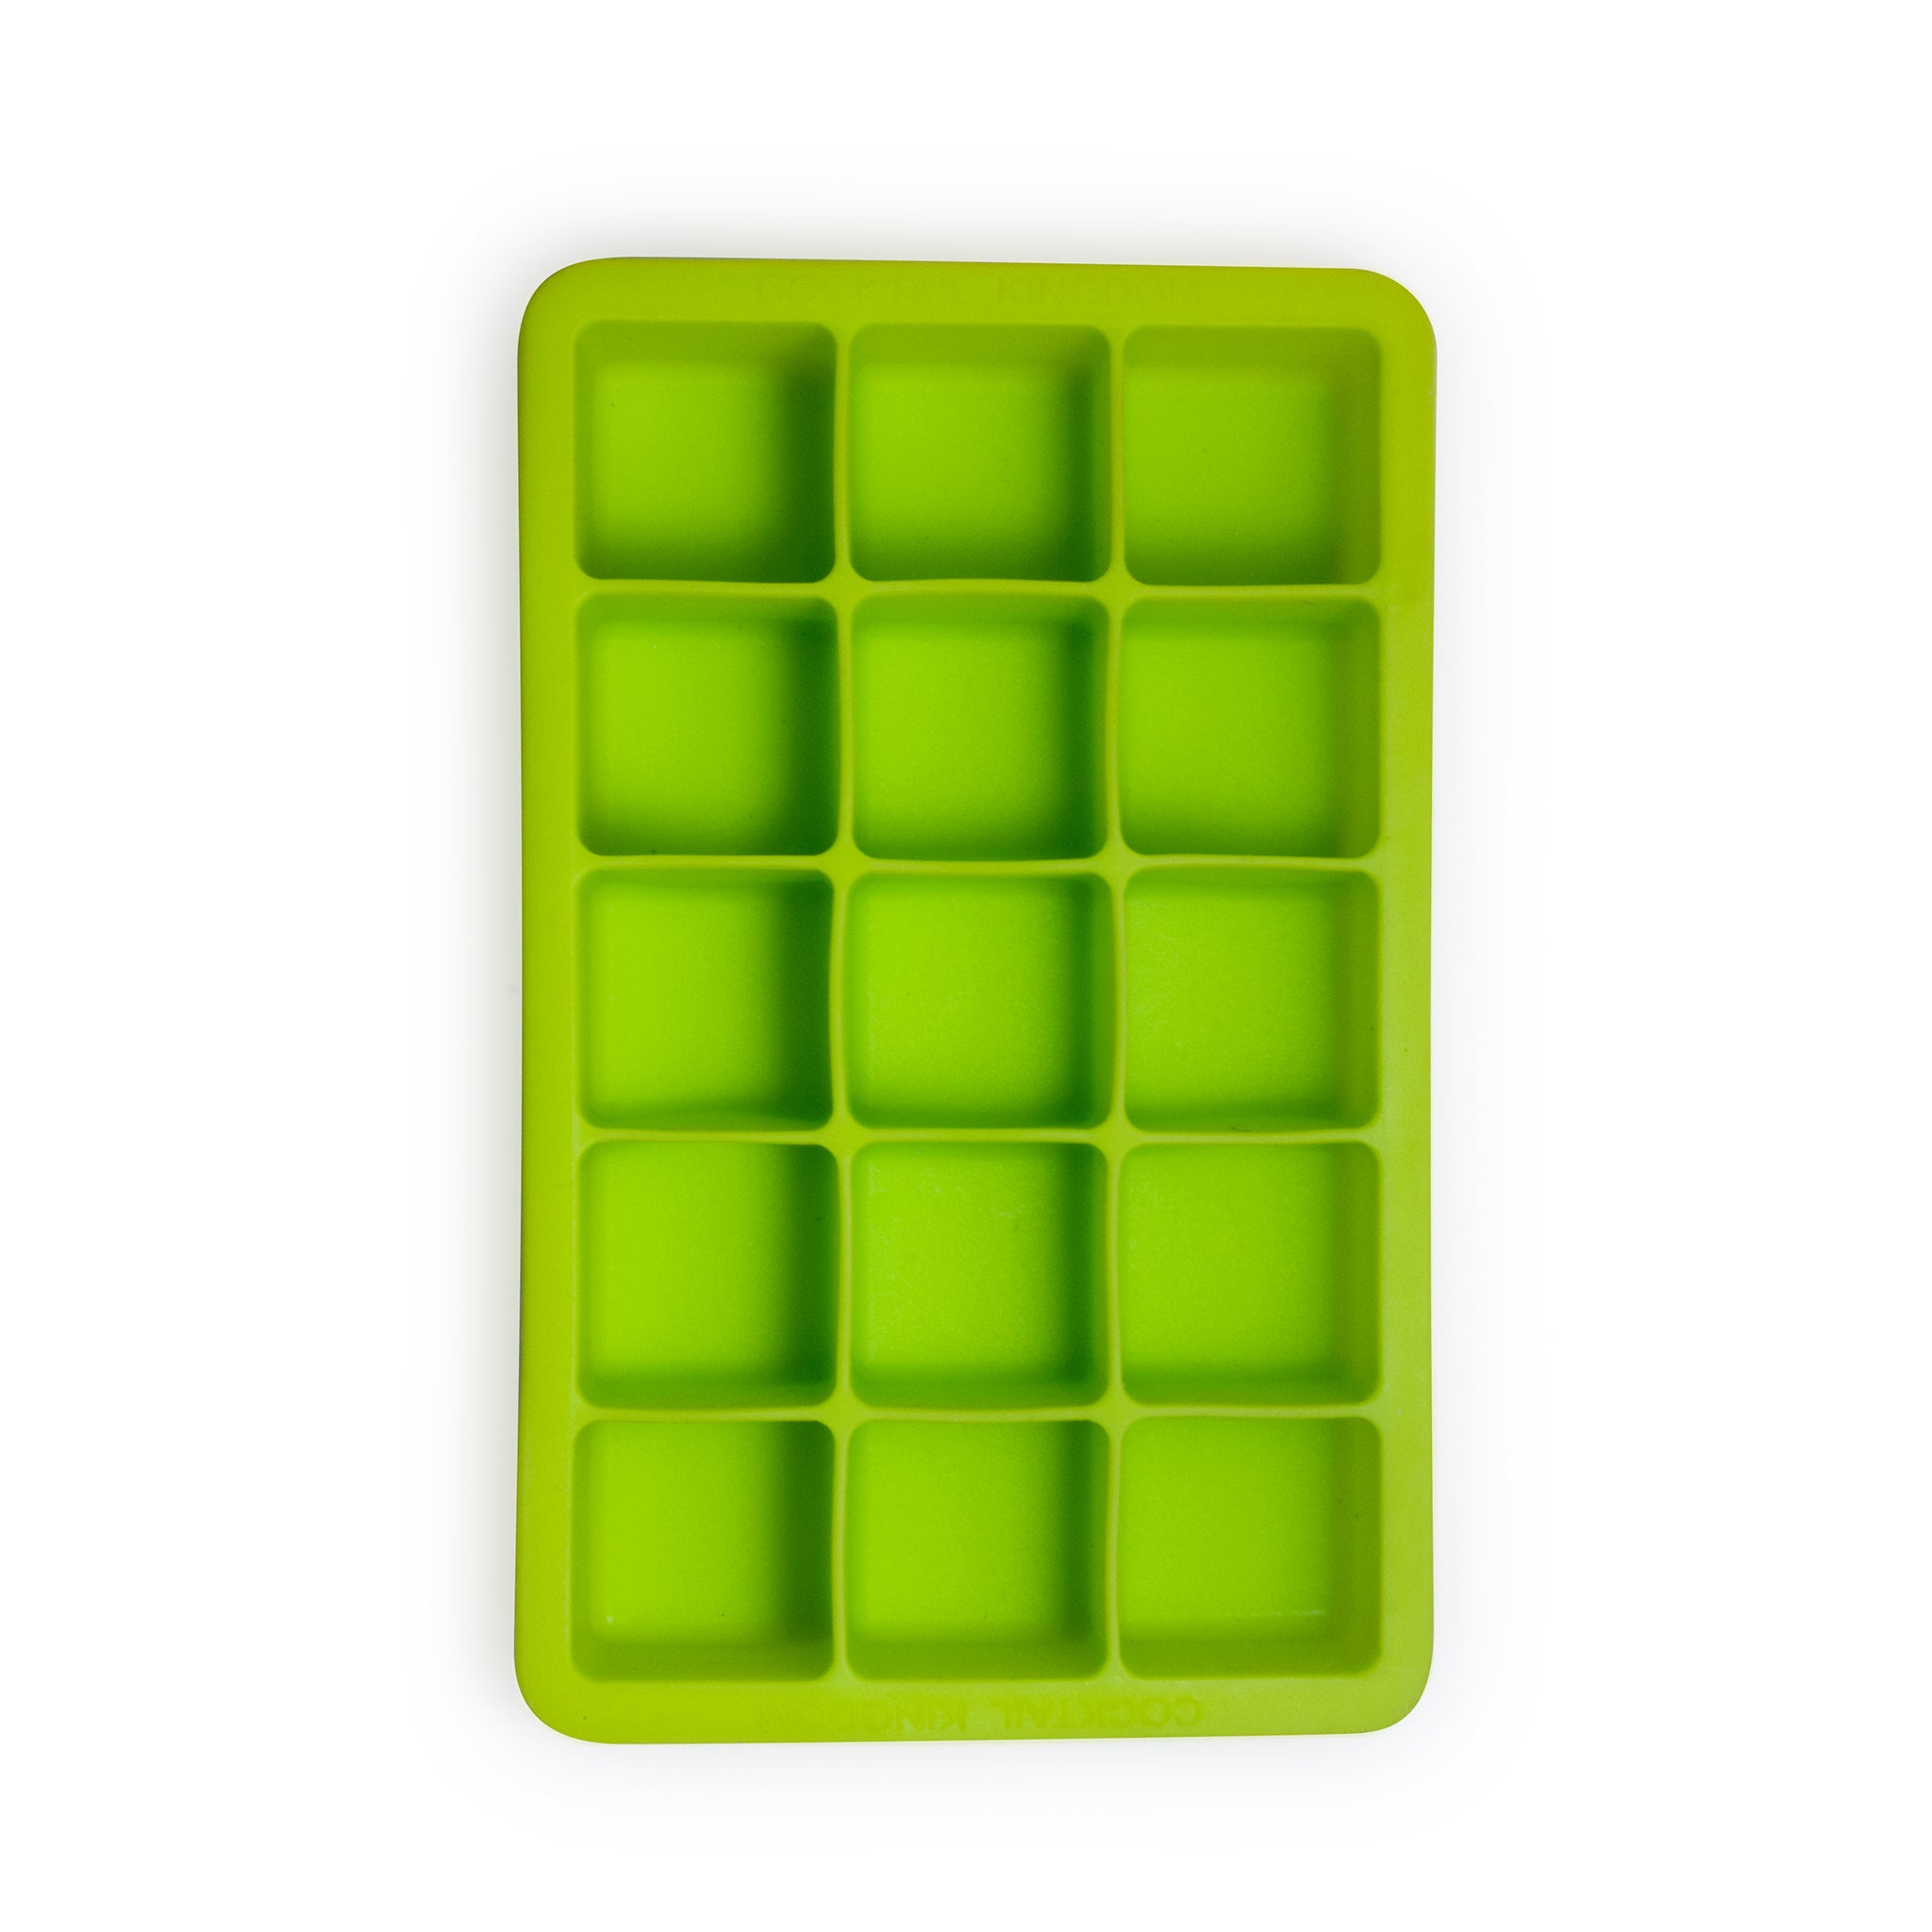 2 Ice Cube Tray Large Mold 15 Big 1.25x1.25 Inch Square Candy